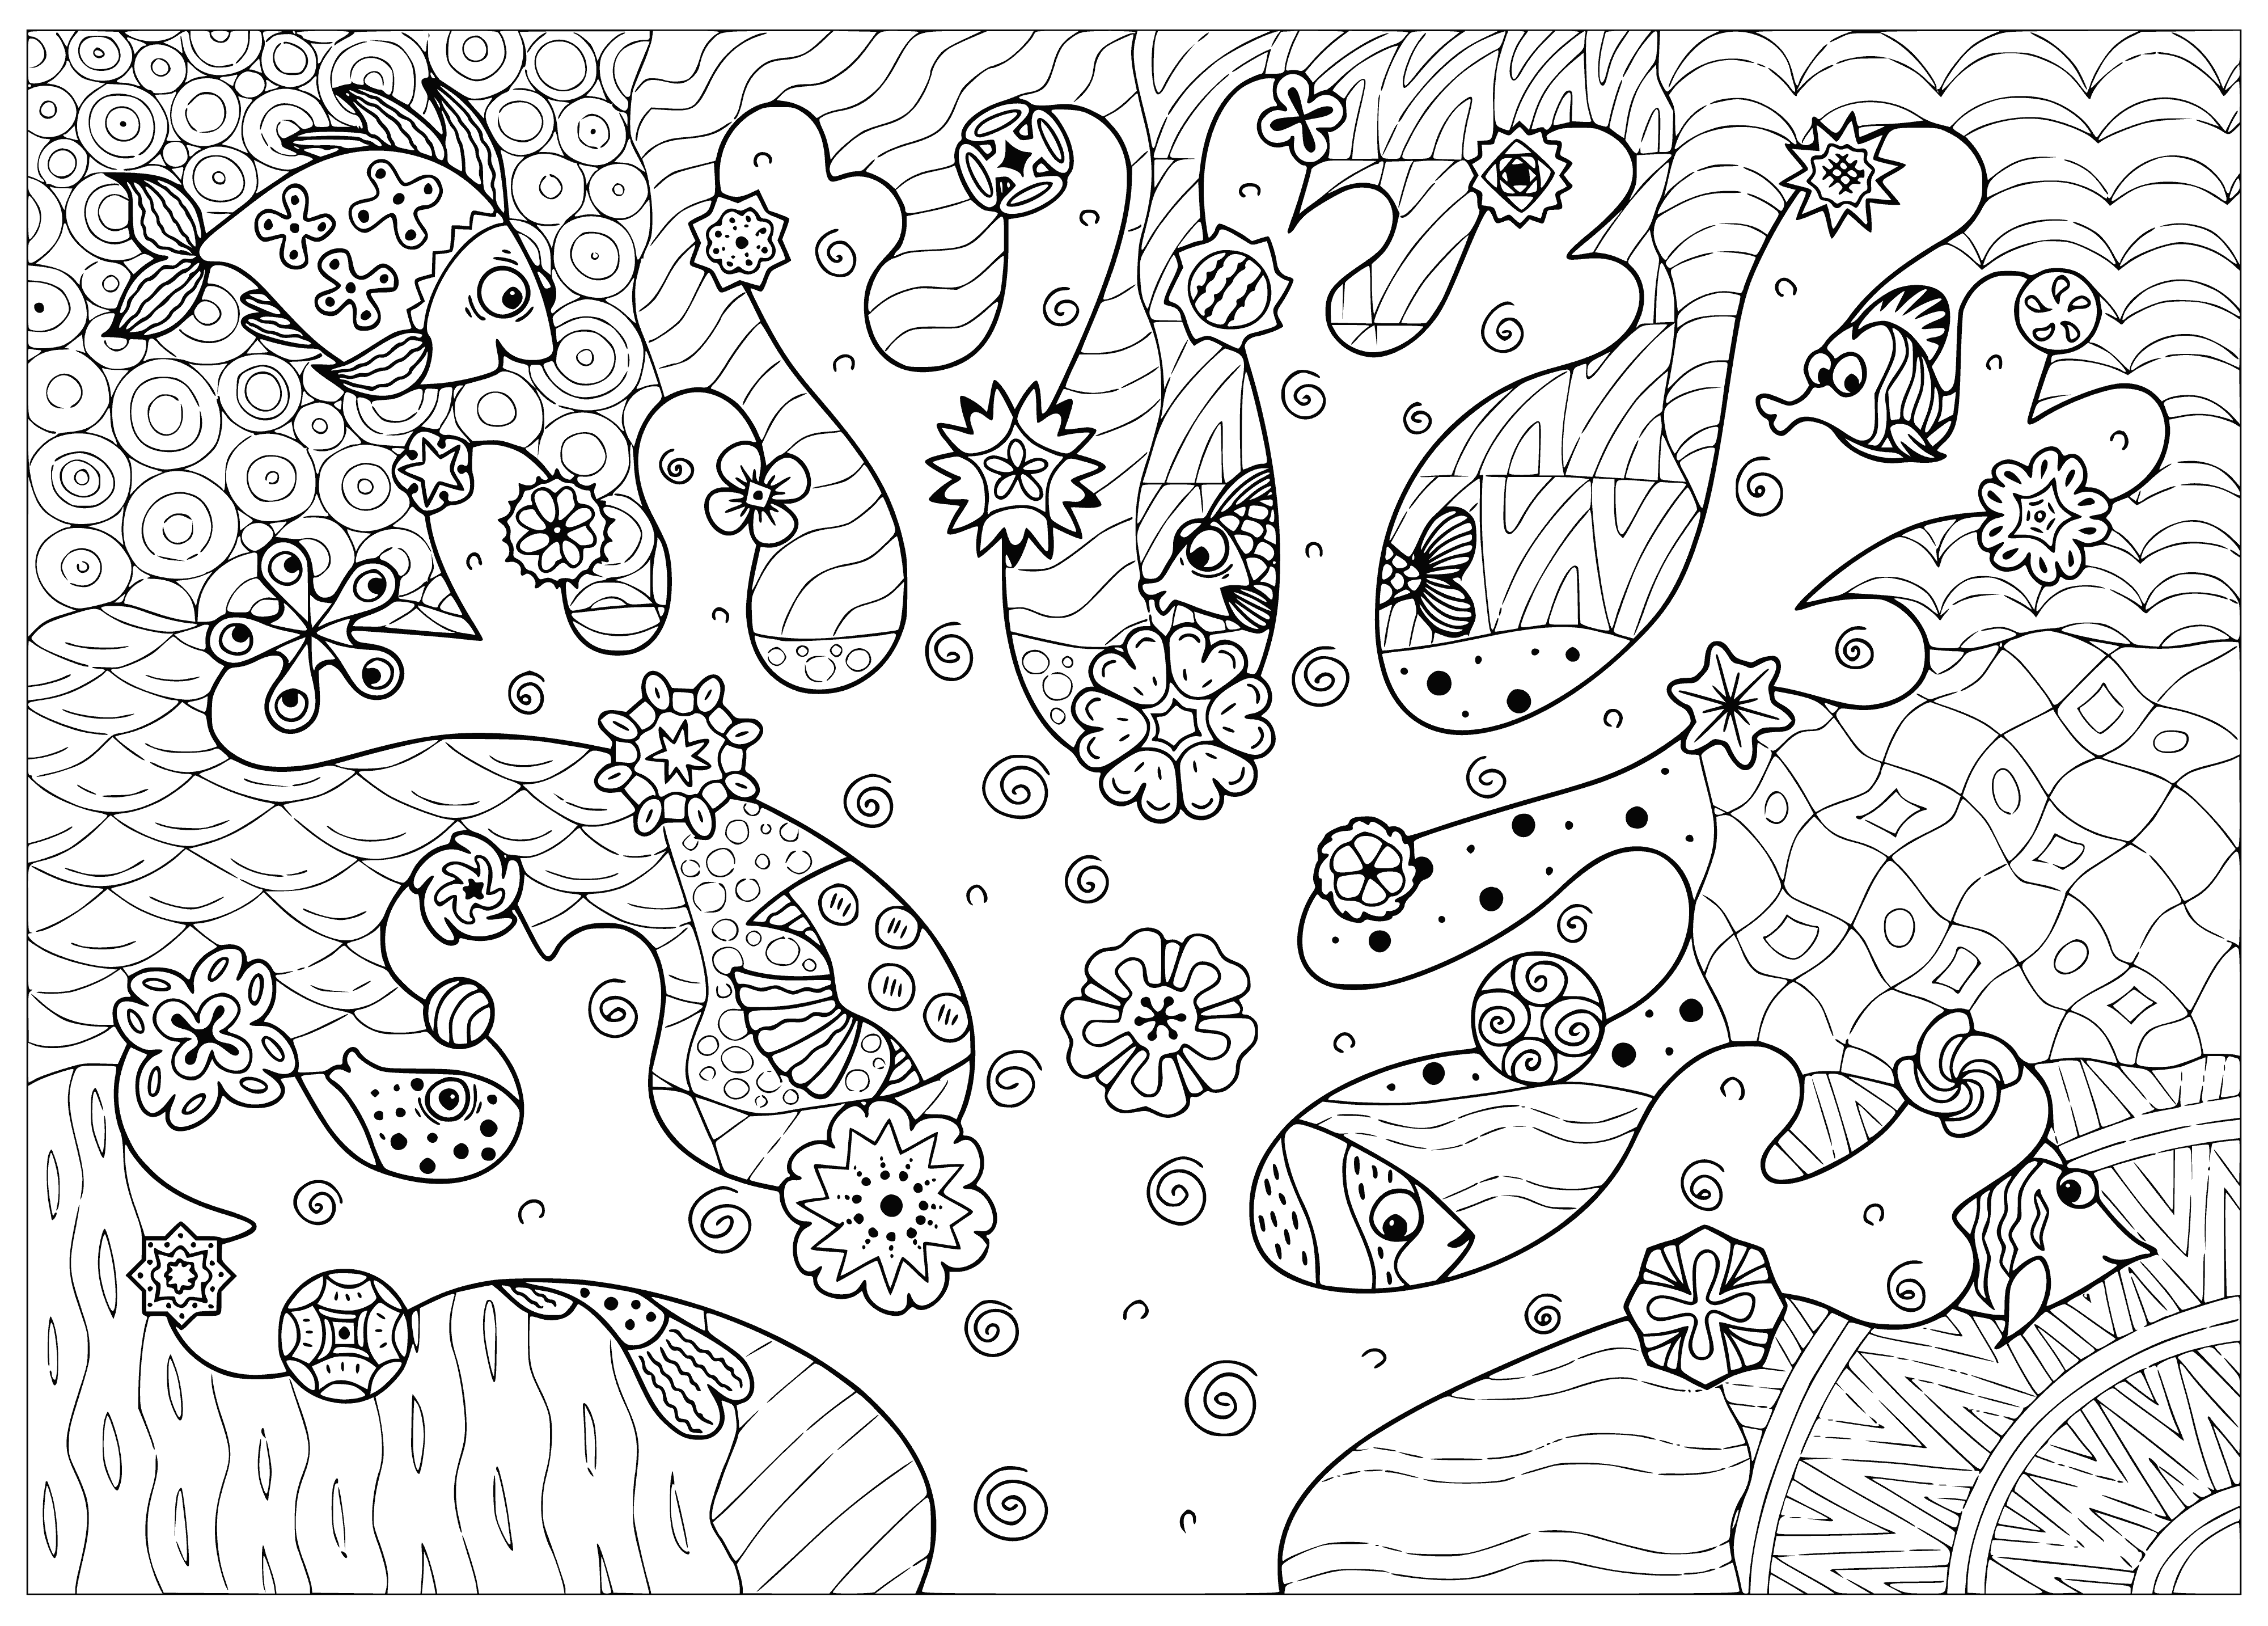 coloring page: Undersea scene w/ coral reefs and tropical fish; colors soothing and great for destressing and relaxing.